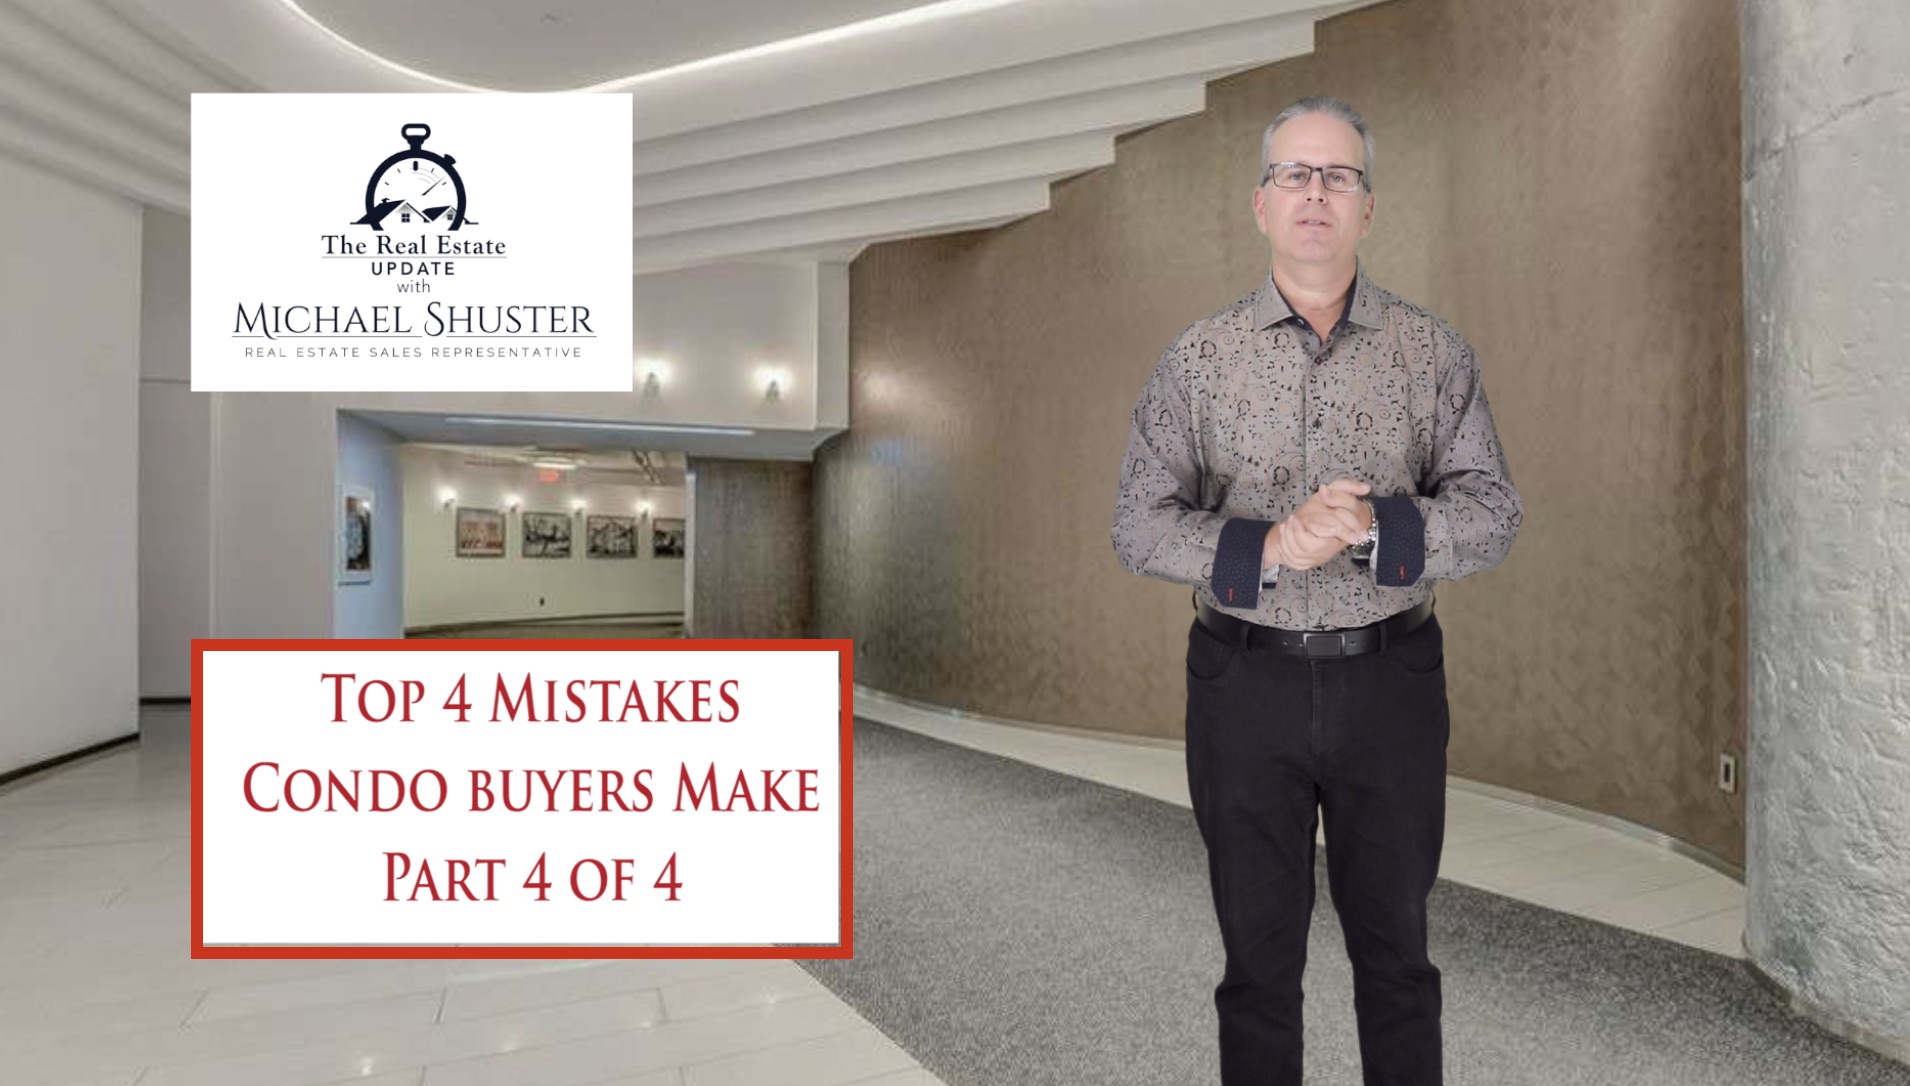 Top 4 Condo Buying Mistakes Part 4